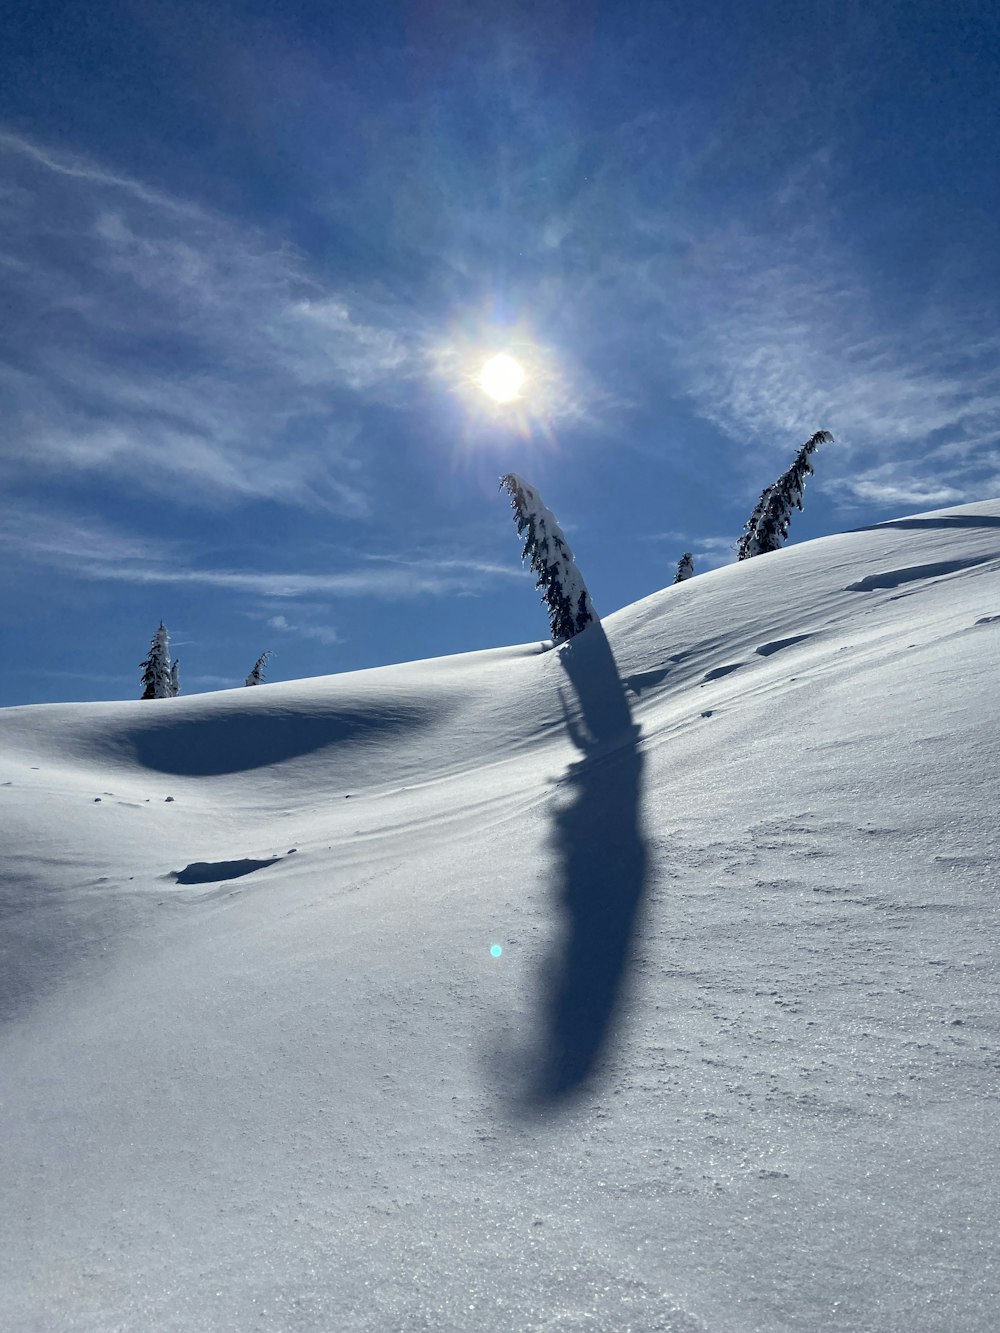 a shadow of a person on a snowboard in the snow